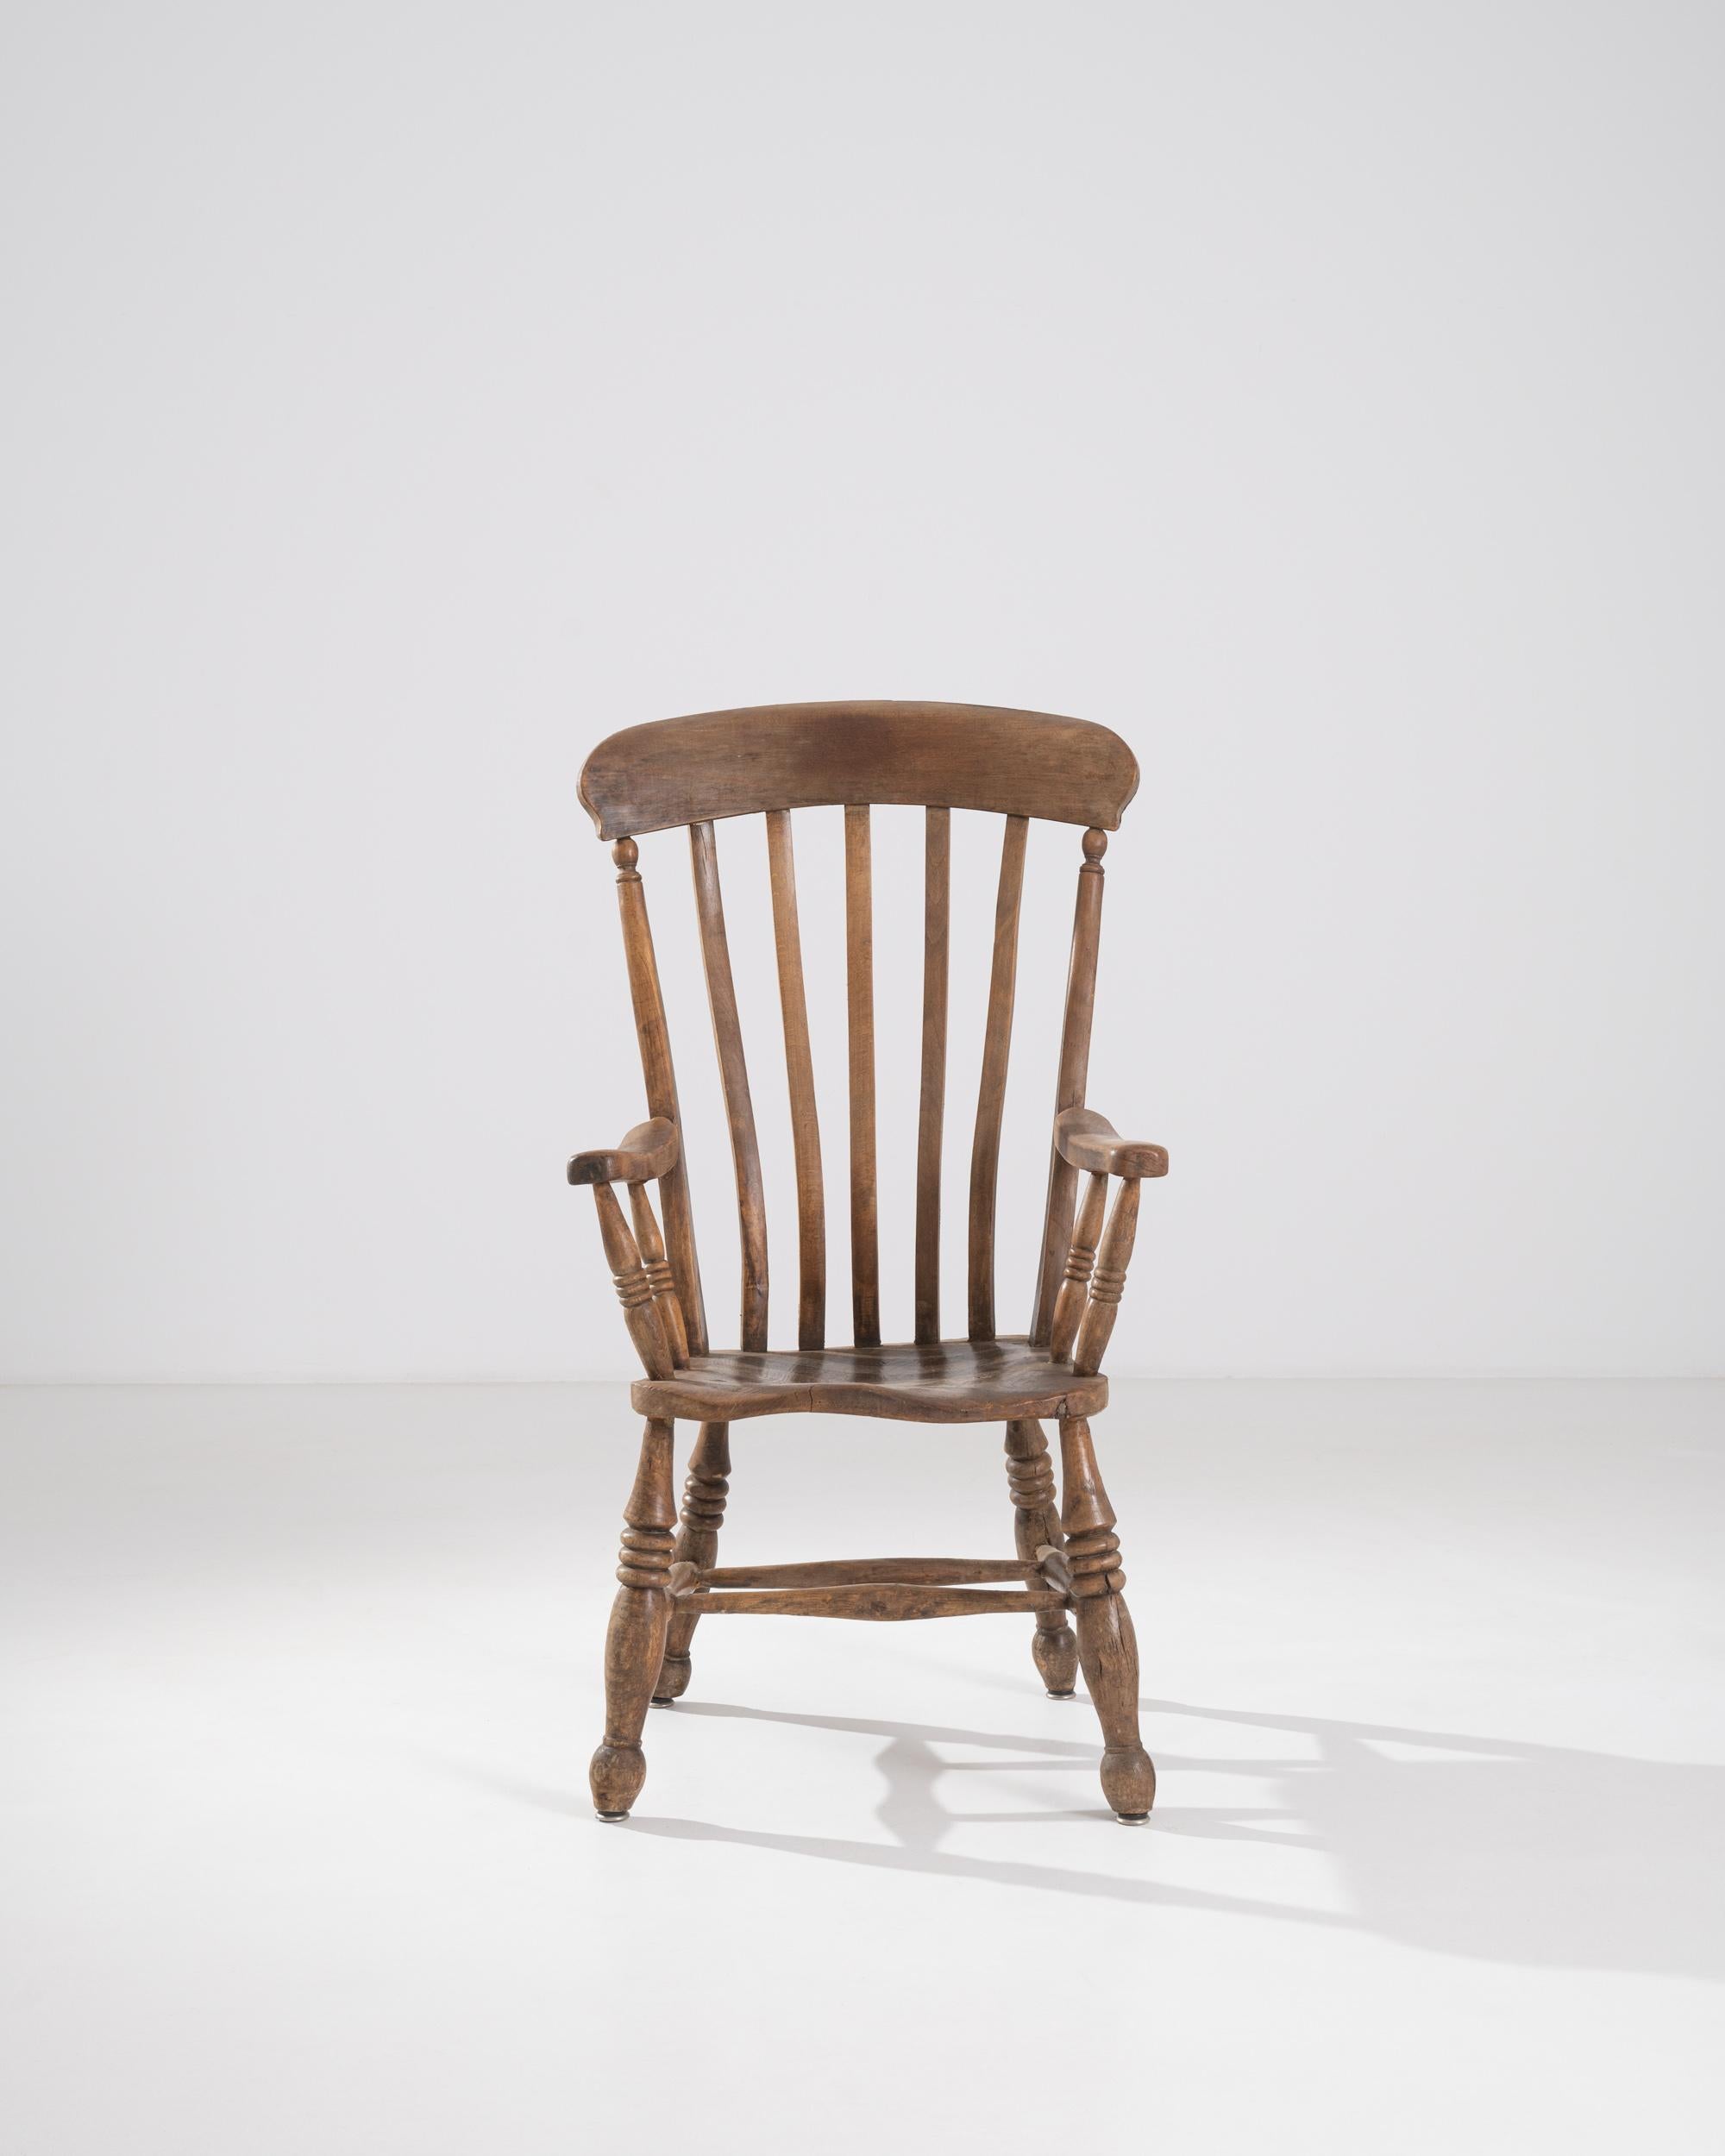 A French chair from the 19th century. This high-backed chair offers a comfortable and elevated moment of rest. Tapering and waving spindles above sloping arm rails and lathed legs create a harmonious synergy throughout its construction. Its rich and